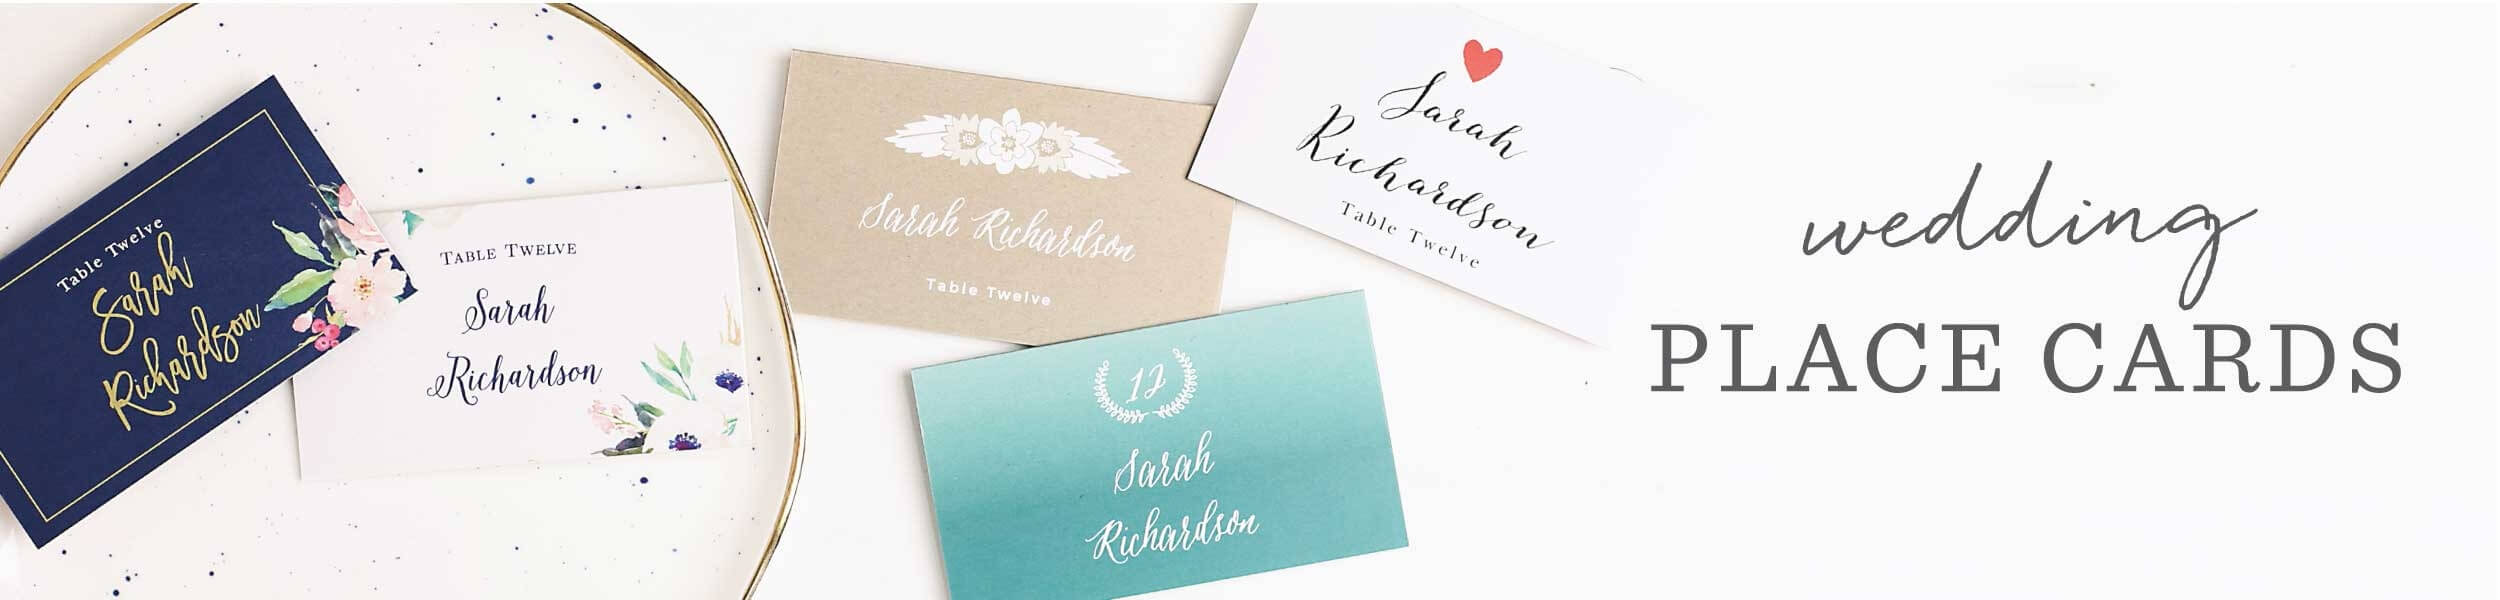 010 Template Ideas Place Cards Word Wedding Card Printable Inside Wedding Place Card Template Free Word